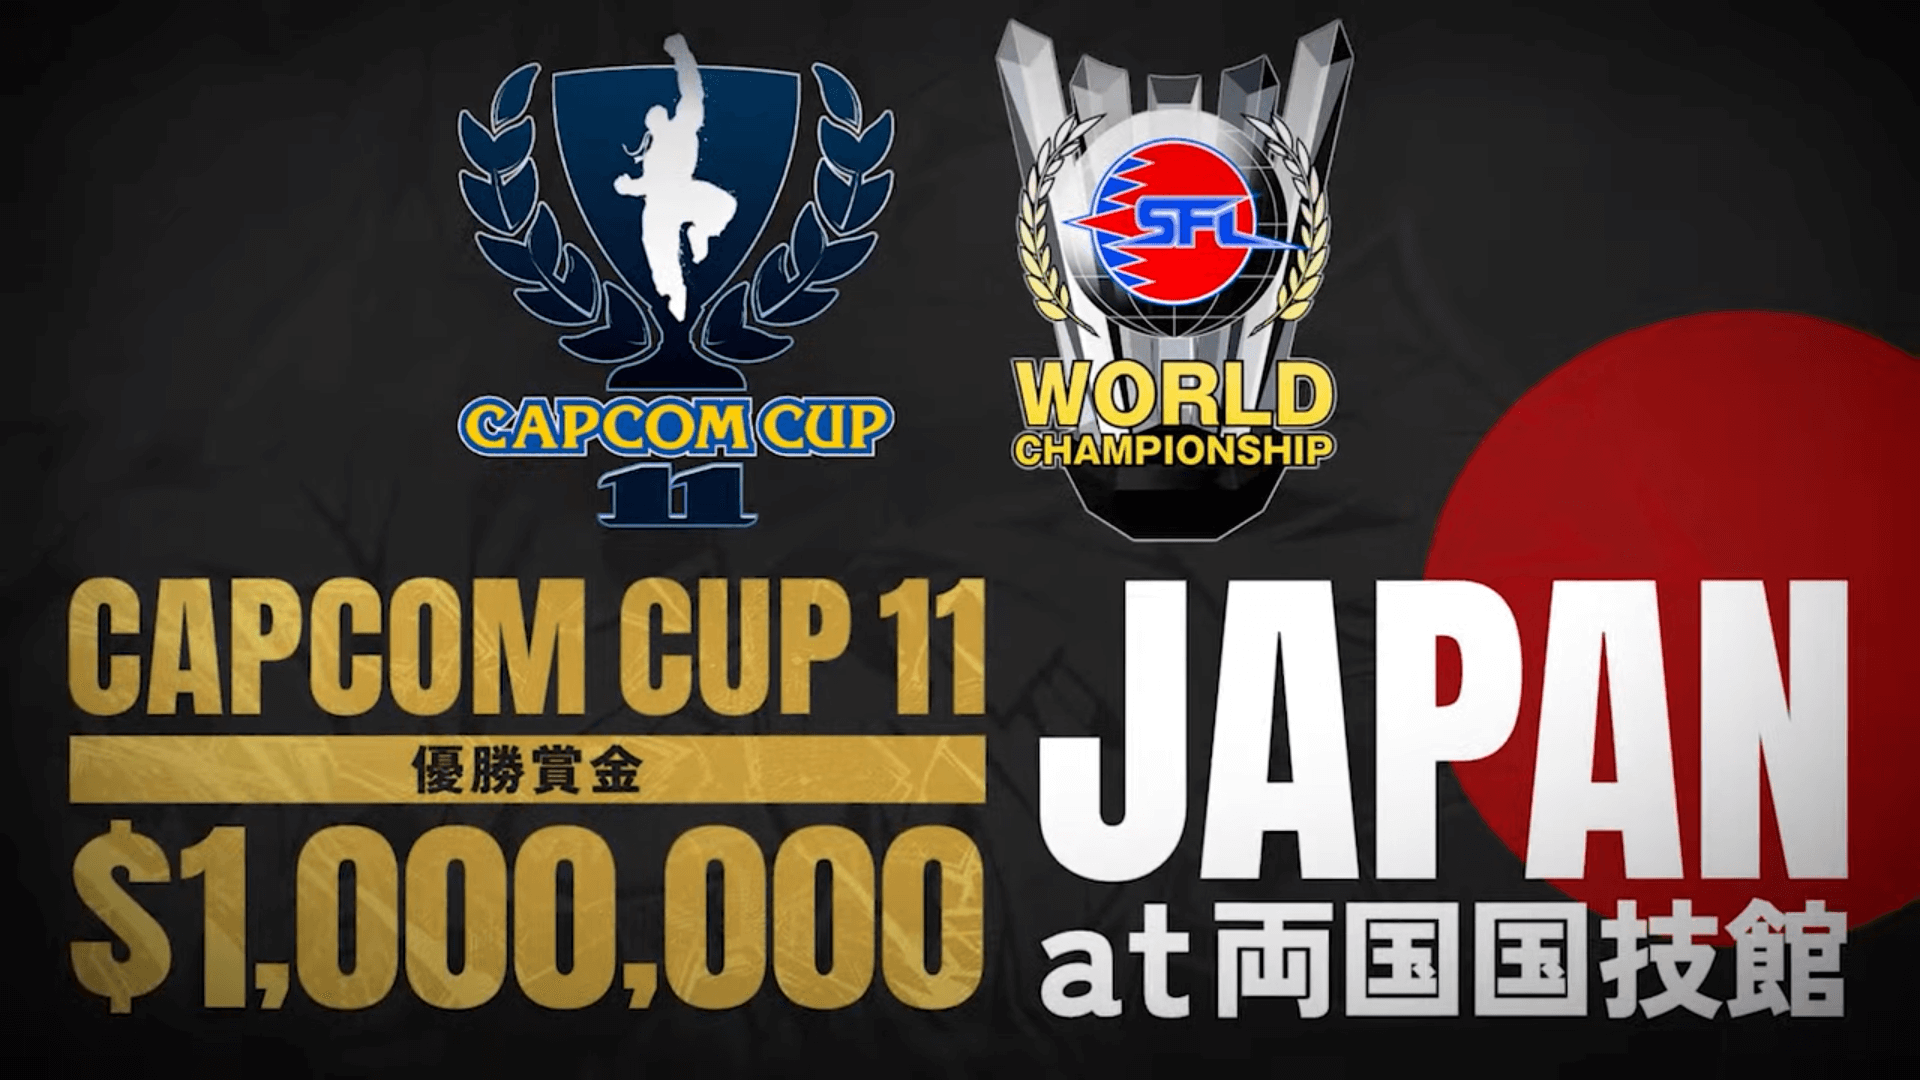 Capcom Cup 11 Will be Held In Japan Ft. $1 Million in Prizes Again